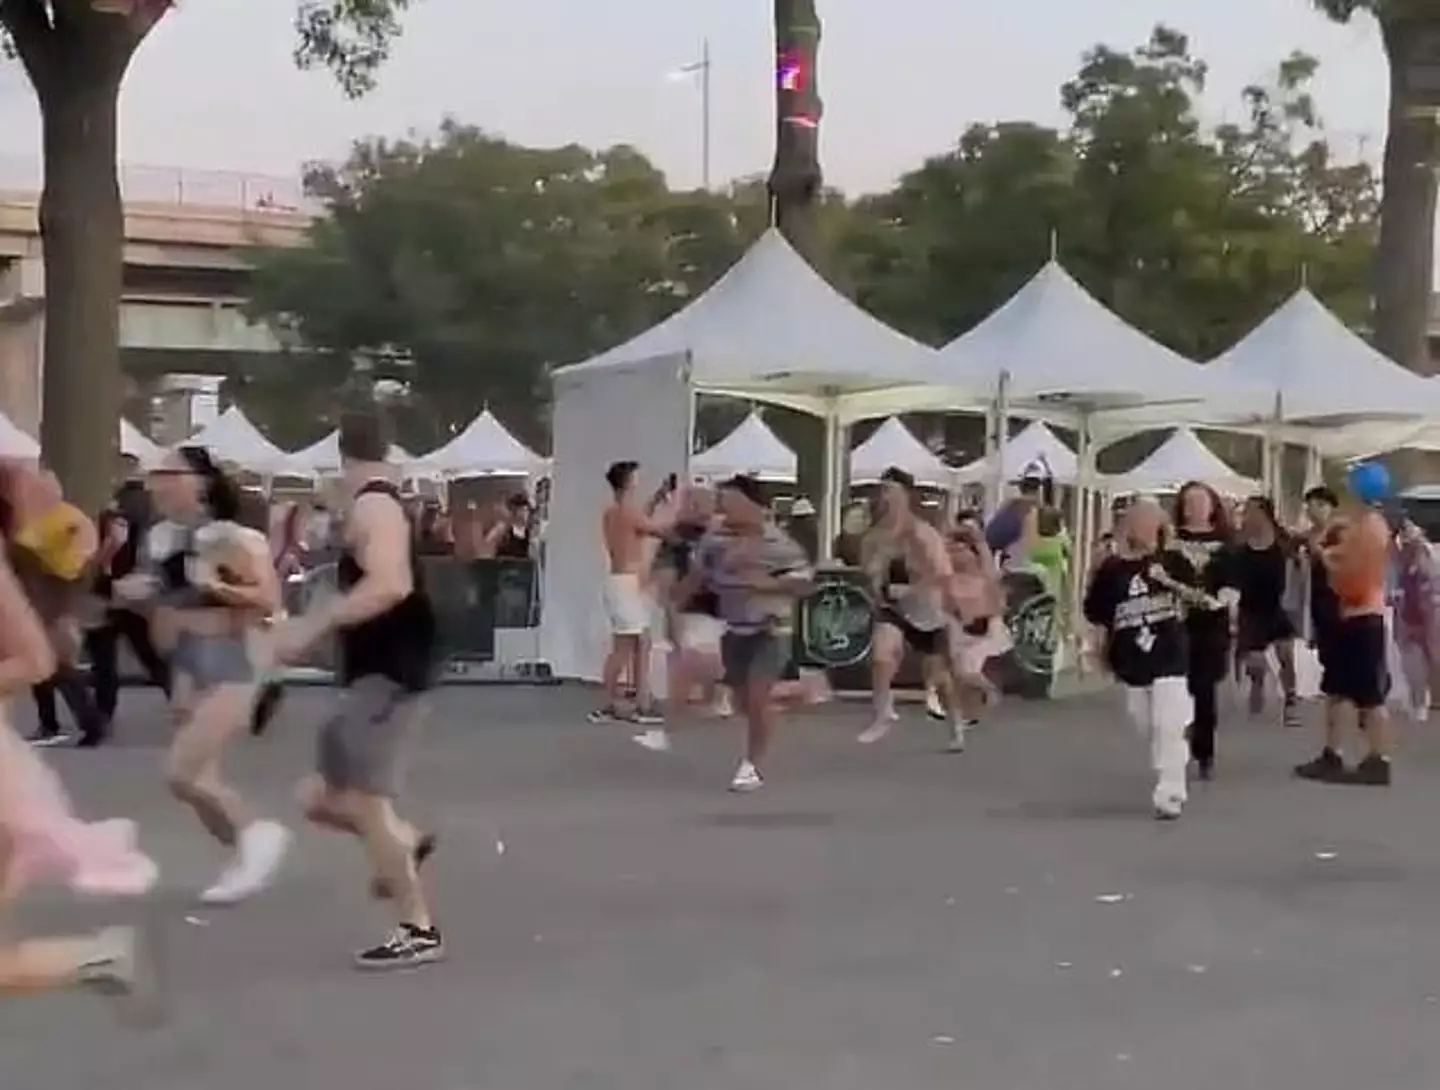 Electric Zoo festival-goers decided to jump the gates as ticket holders were reportedly turned away due to ‘unforeseen circumstances'.